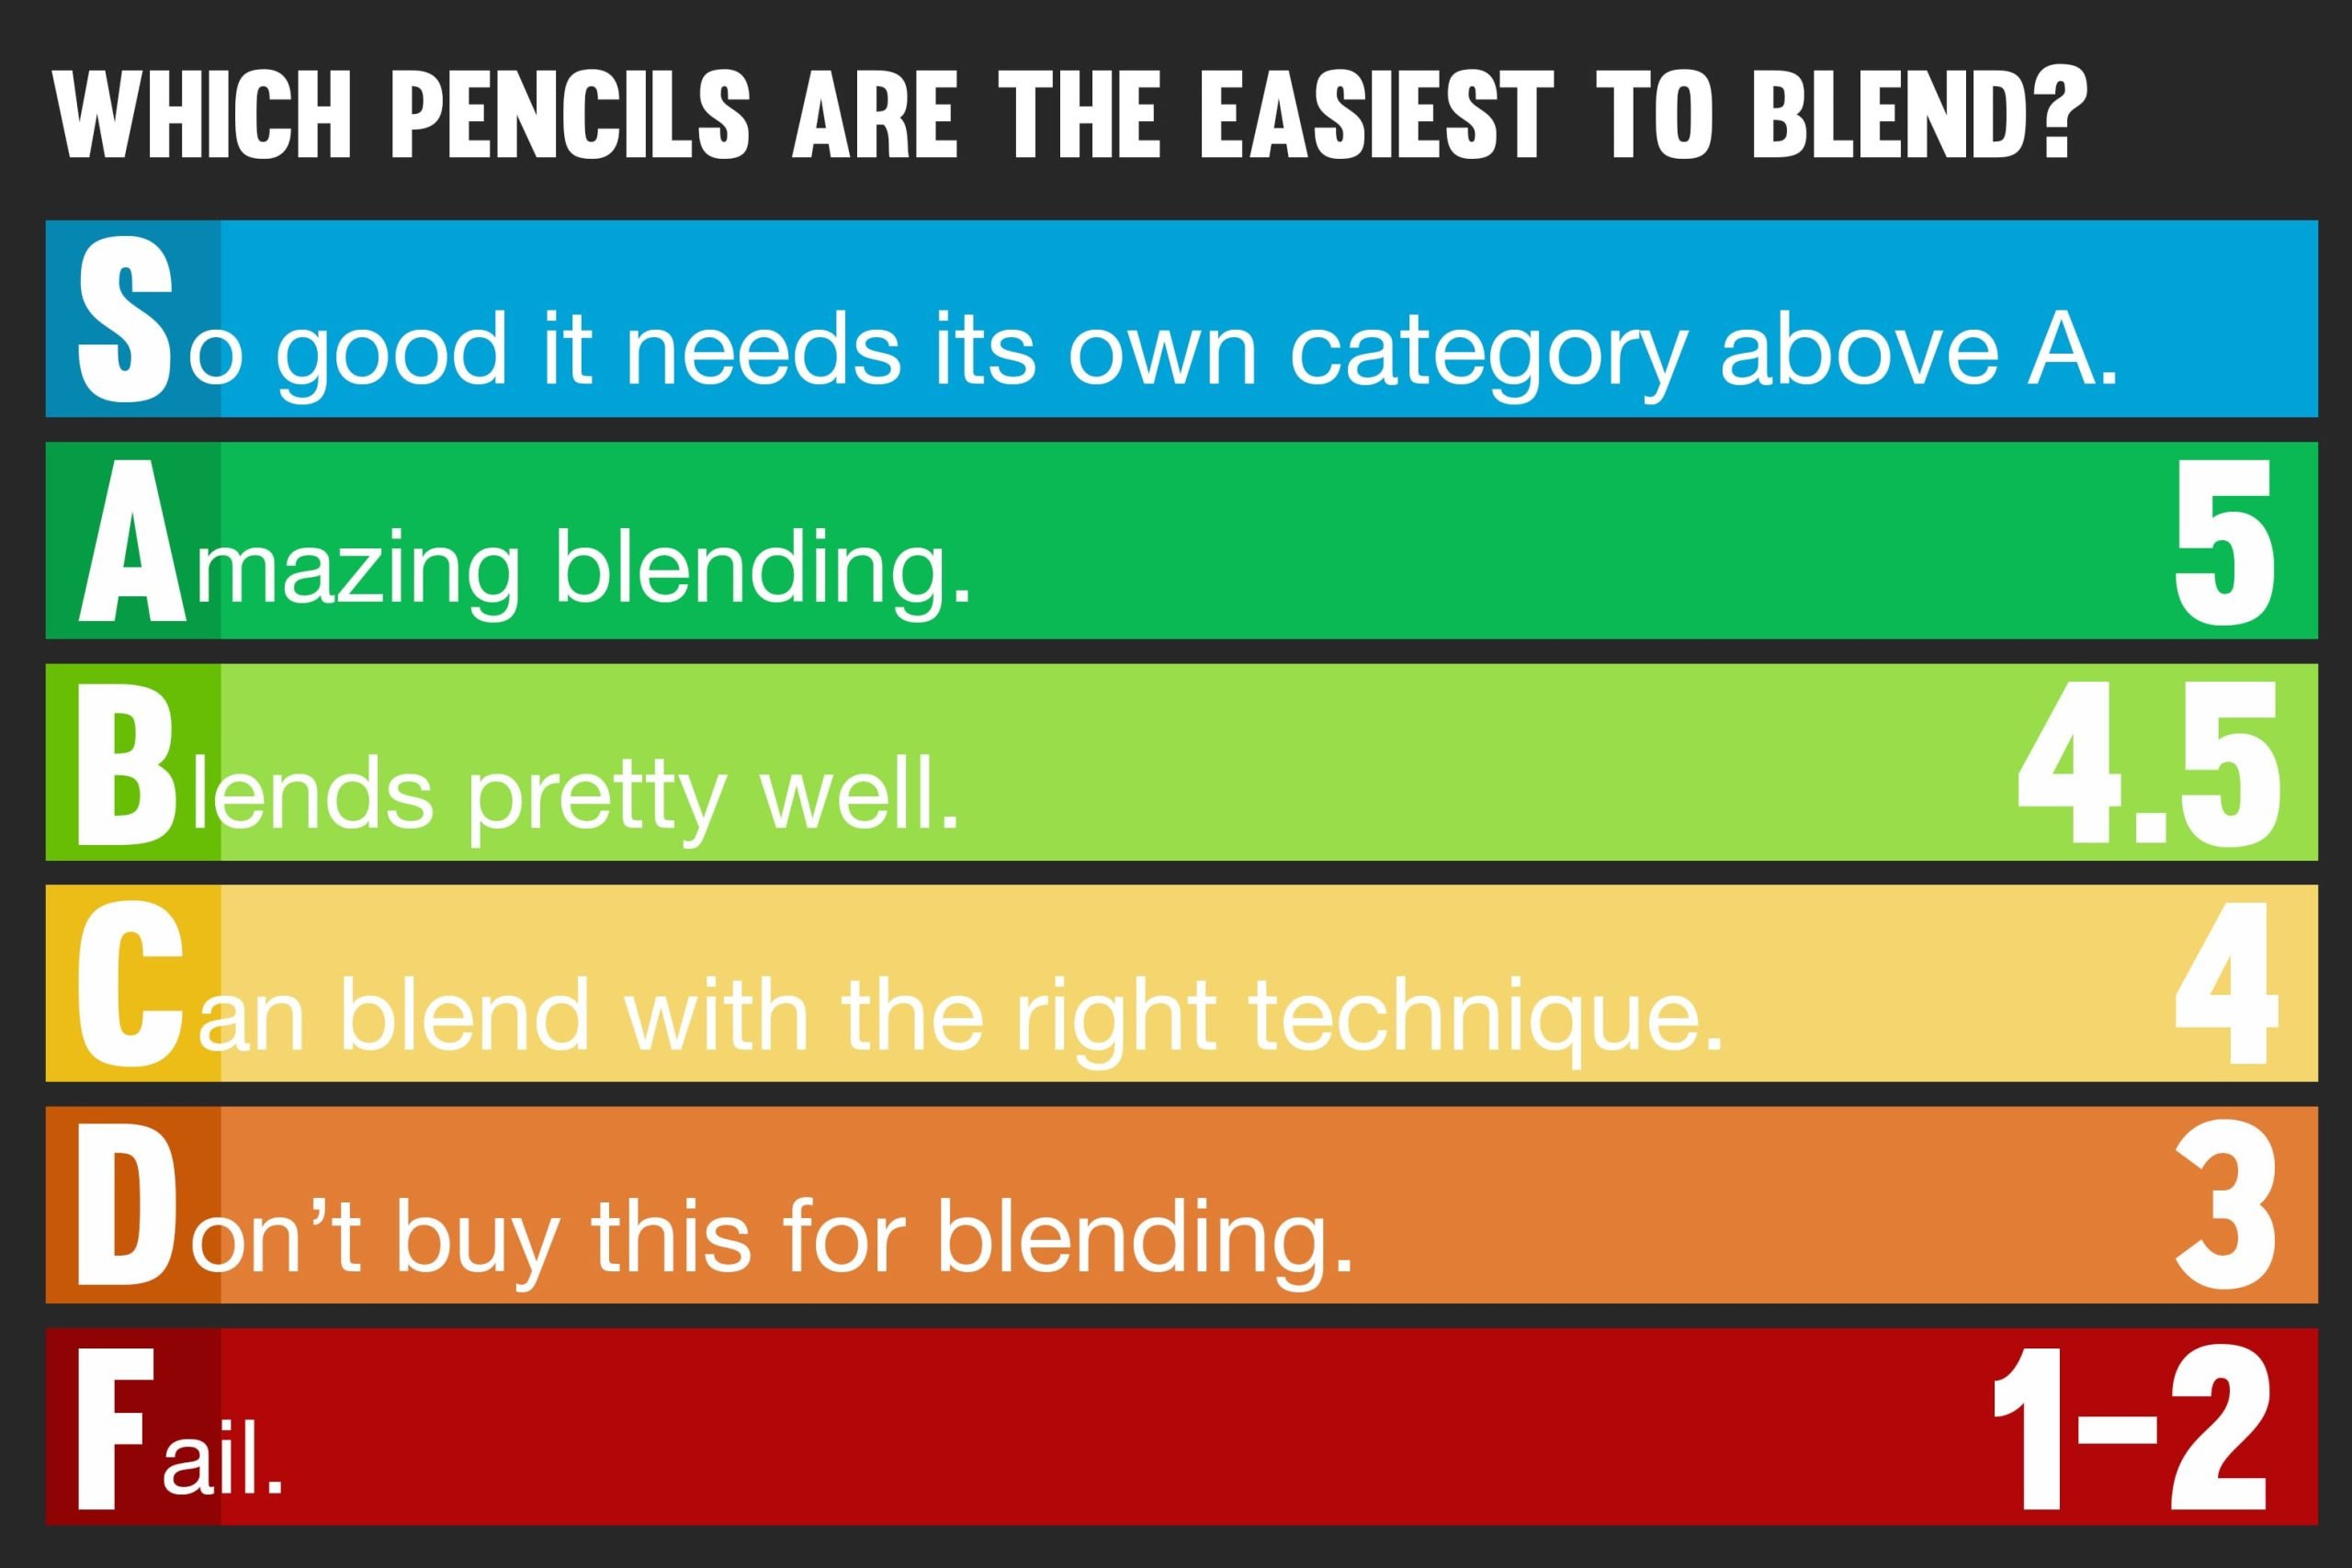 Which Pencils are the Easiest to Blend Chart - S Tier list of all the pencils and their ranking